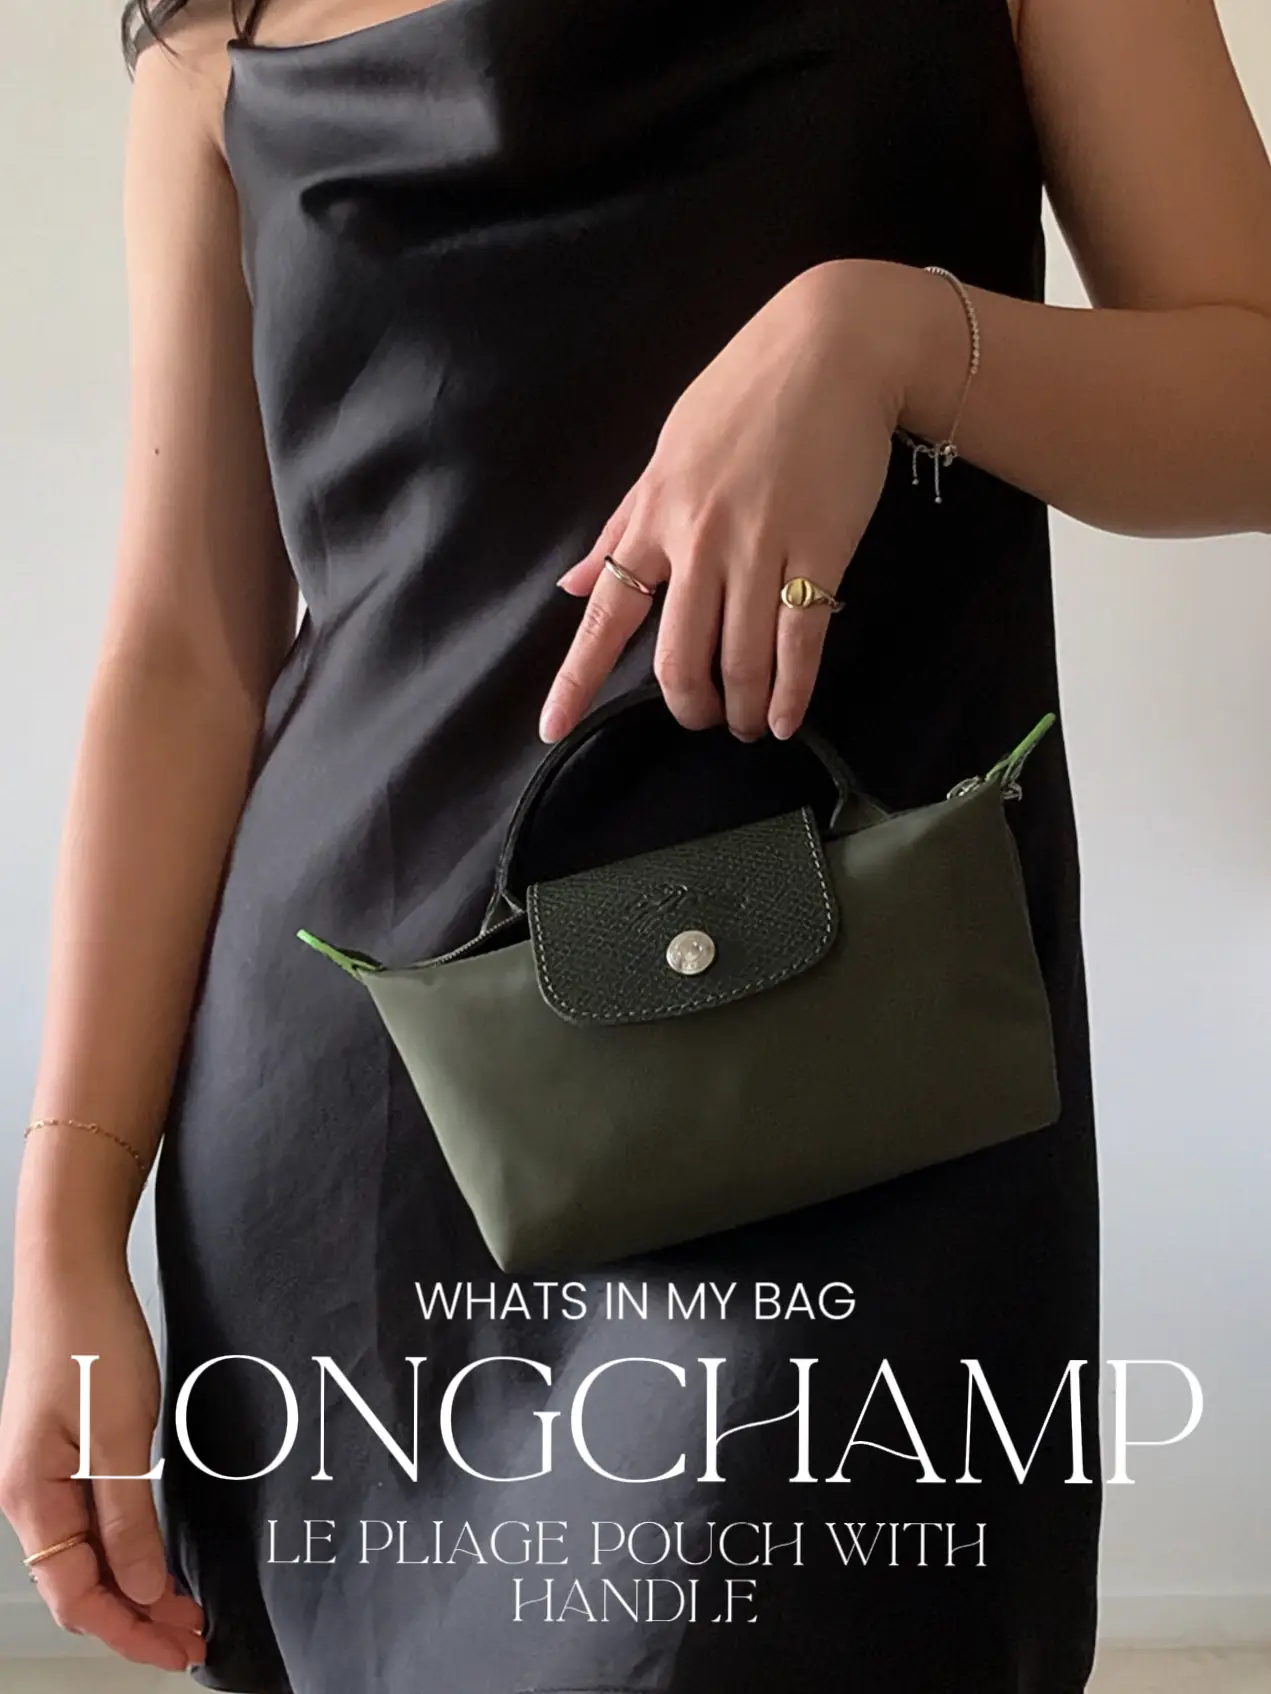 I got the viral Longchamp pouch with handle🌿